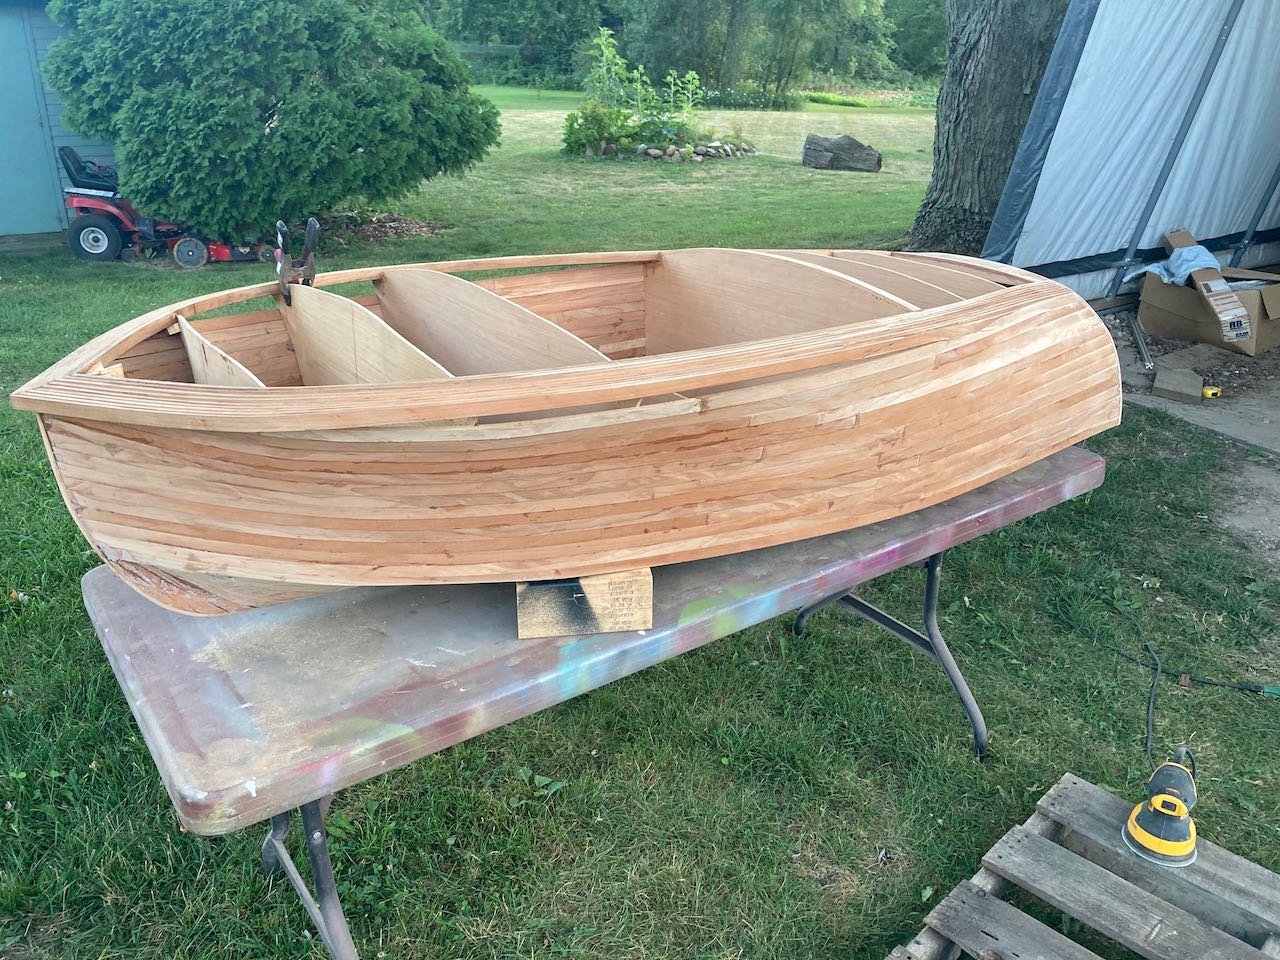 This small boat under construction is resting on a table outdoors. The hull is not quite complete, but parts of it have been roughly sanded.